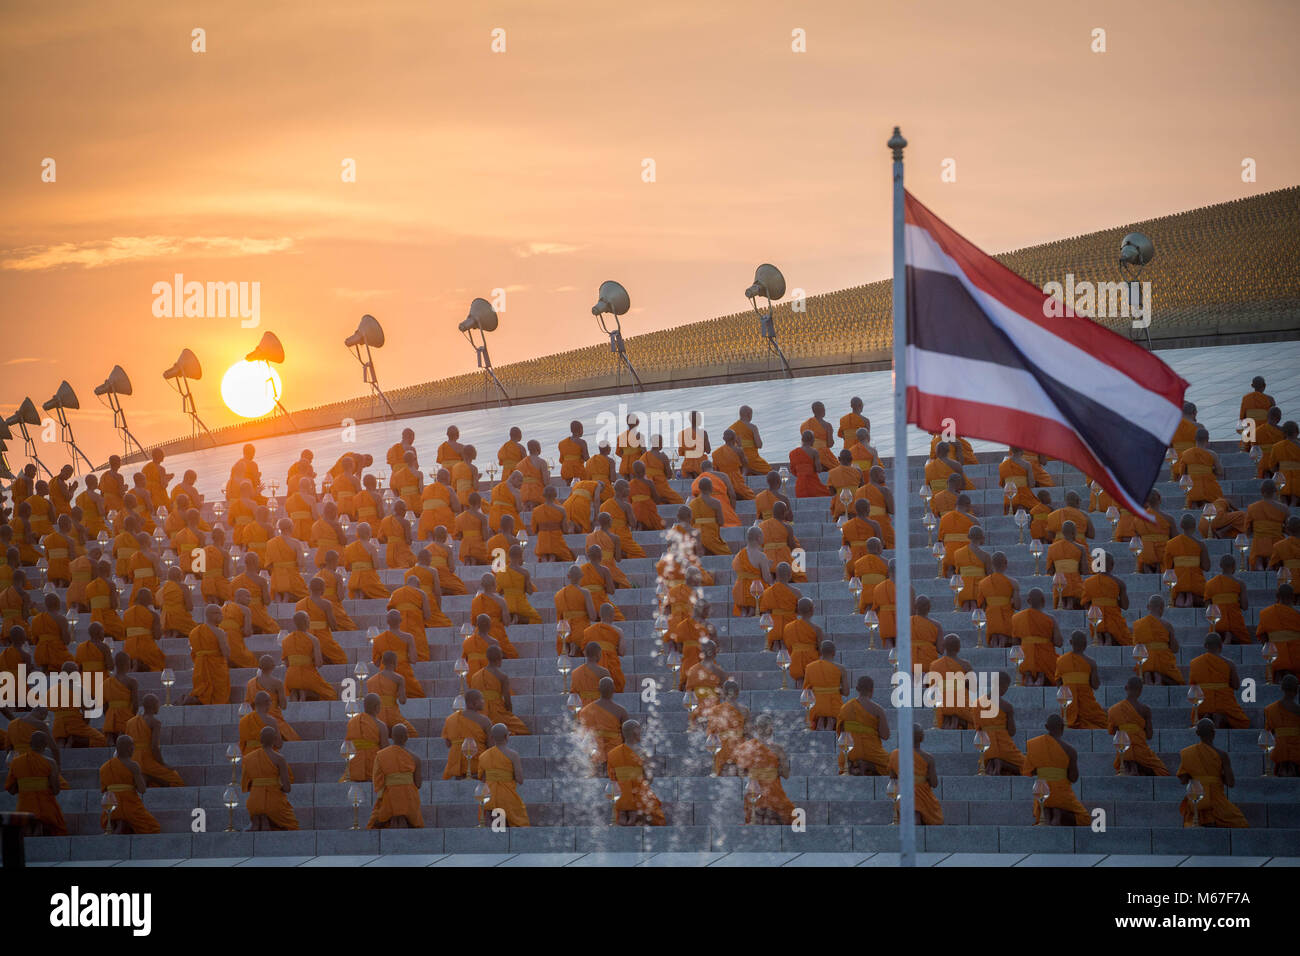 Bangkok Pathum Thani Thailand 1st Mar 18 Monks Seen Praying While Holding Lanterns As The Sun Goes Down During The Yearly Makha Bucha Ceremony In The North Of Bangkok Buddhist Devotees Celebrate The